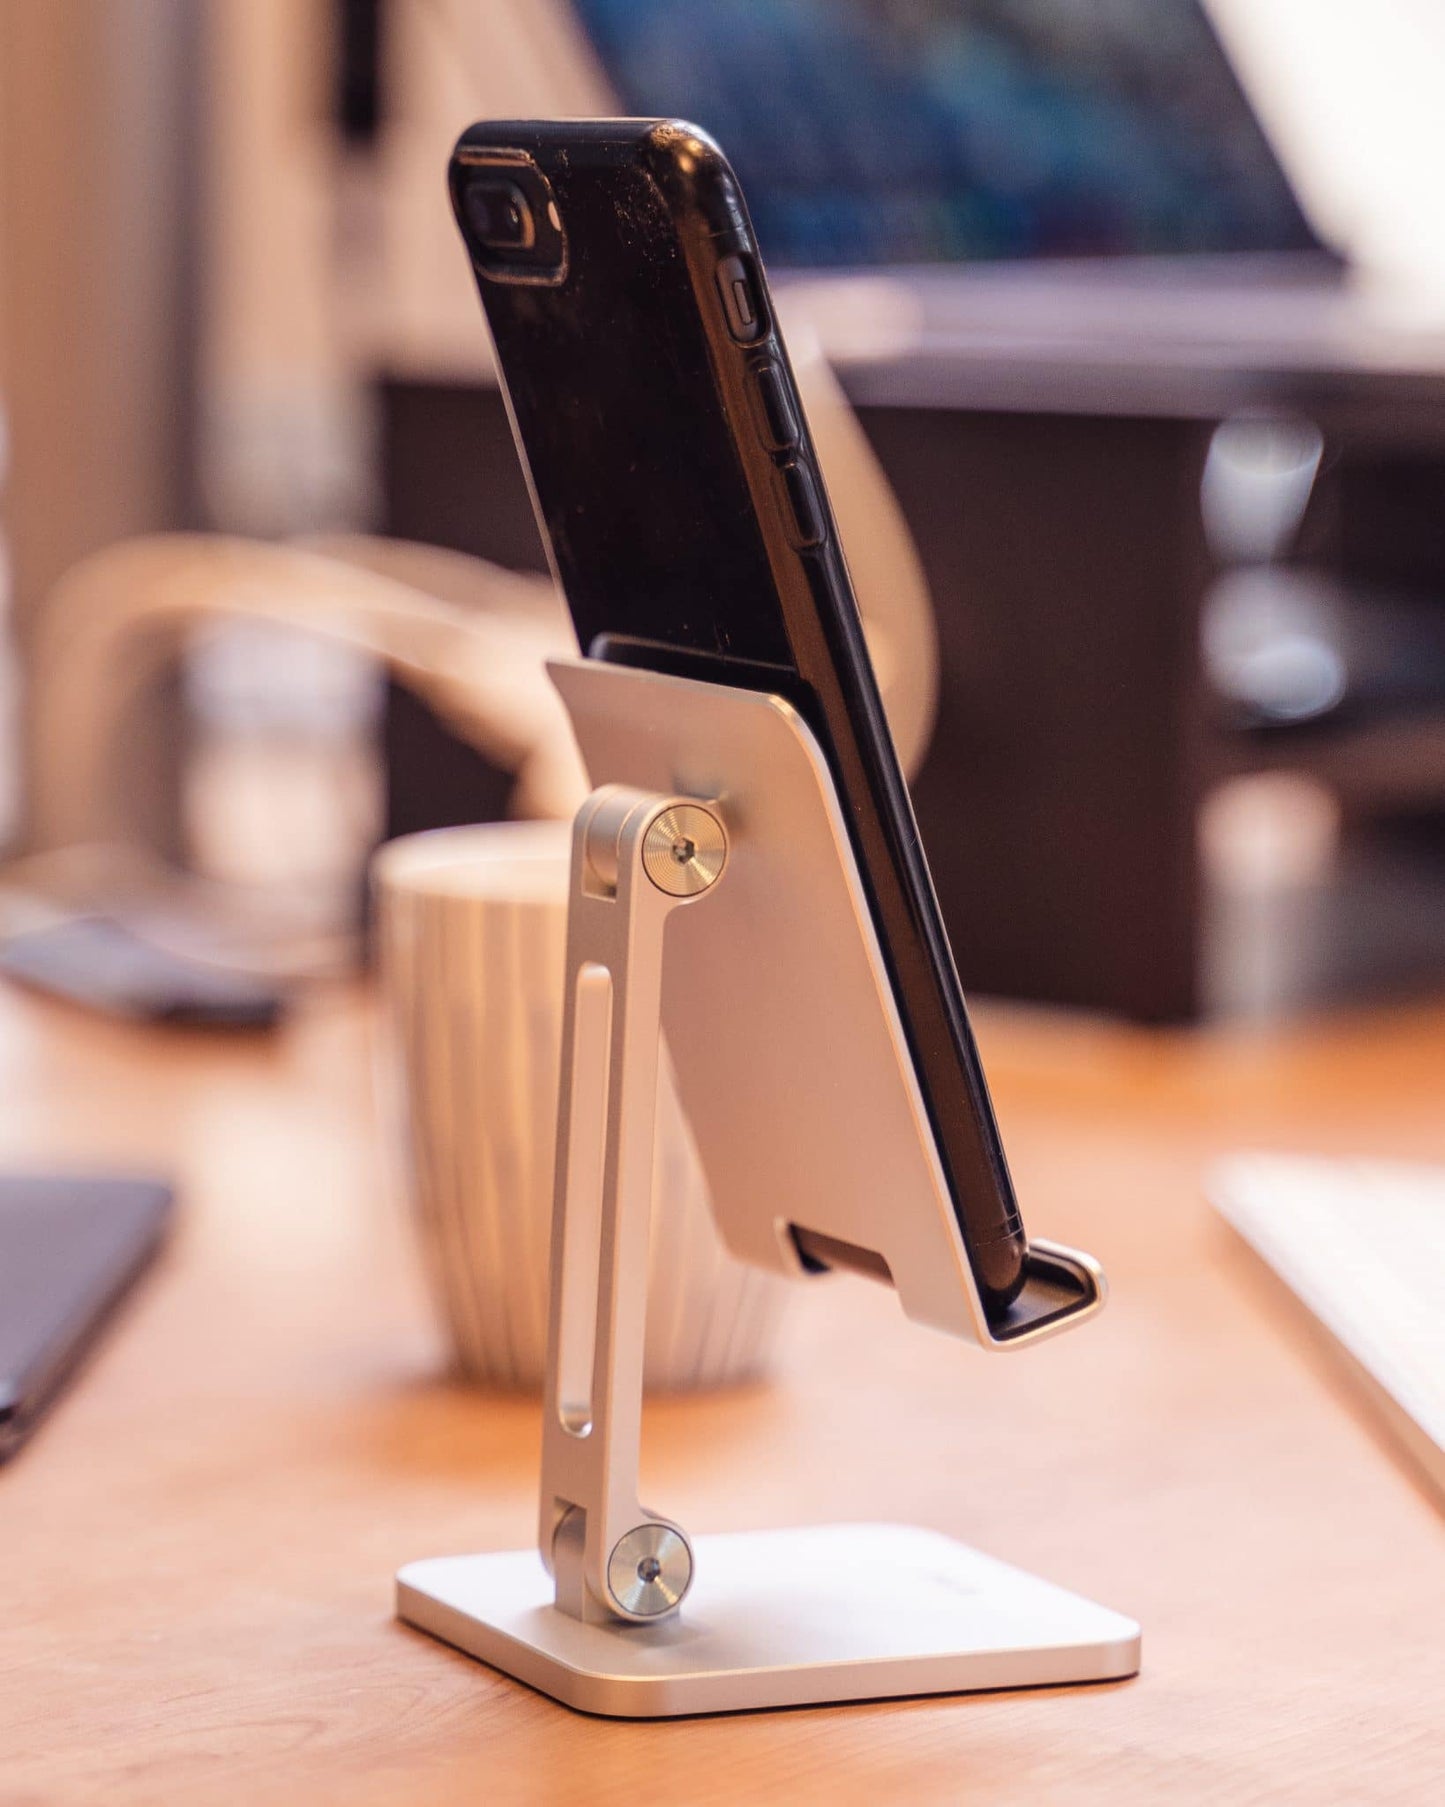 WiWu Luxury Smartphone and Tablet Stand for table or desk - Extra Sturdy & Foldable